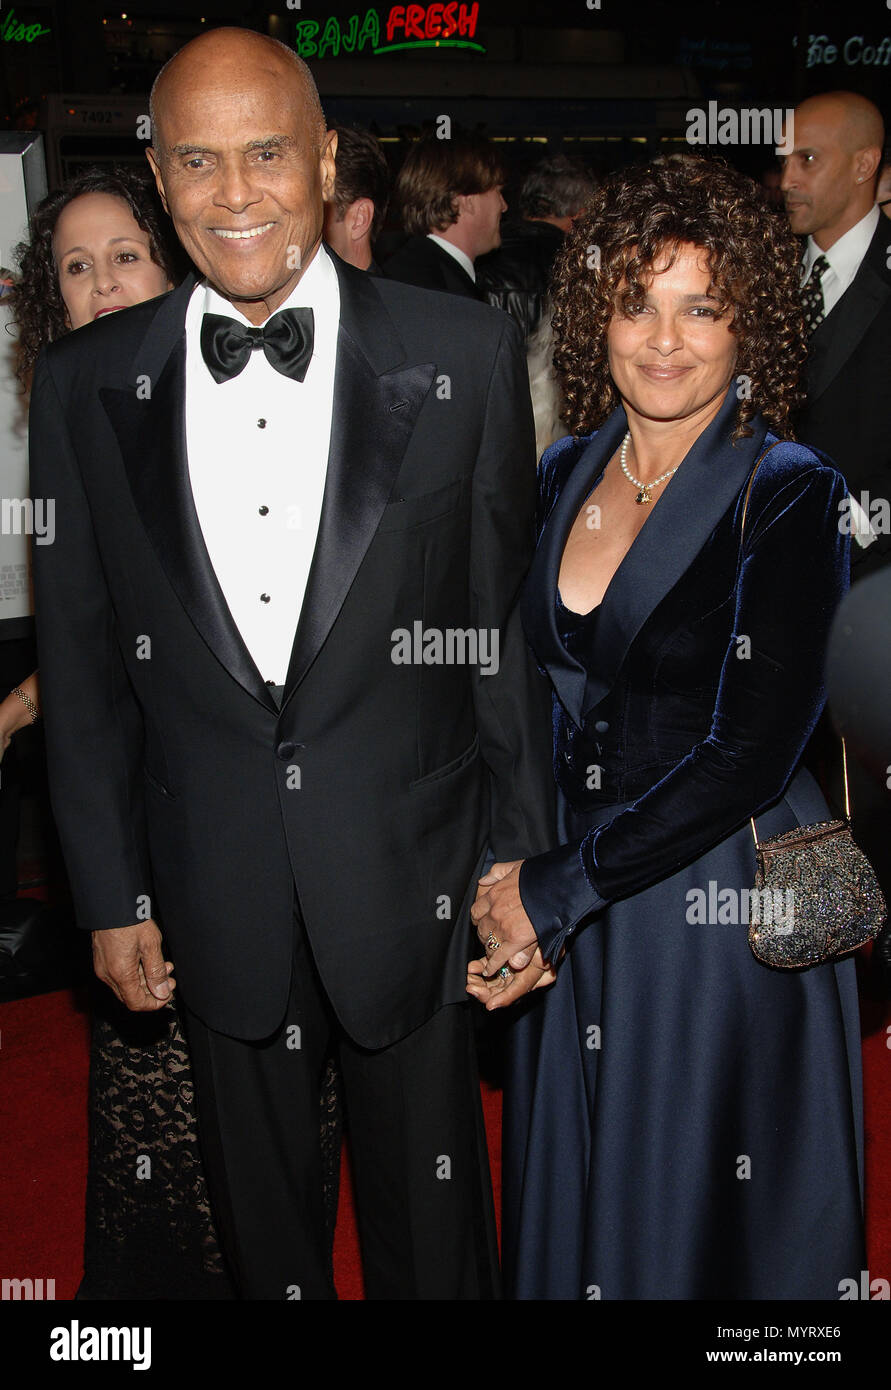 Harry Belafonte and daughter Shari arriving at the BOBBY  Premiere at the Chinese  Theatre in Los Angeles.  3/4 smile BelafonteHarry Shari 054  Event in Hollywood Life - California, Red Carpet Event, USA, Film Industry, Celebrities, Photography, Bestof, Arts Culture and Entertainment, Celebrities fashion, Best of, Hollywood Life, Event in Hollywood Life - California, Red Carpet and backstage, Music celebrities, Topix, Couple, family ( husband and wife ) and kids- Children, brothers and sisters inquiry tsuni@Gamma-USA.com, Credit Tsuni / USA, 2006 to 2009 Stock Photo